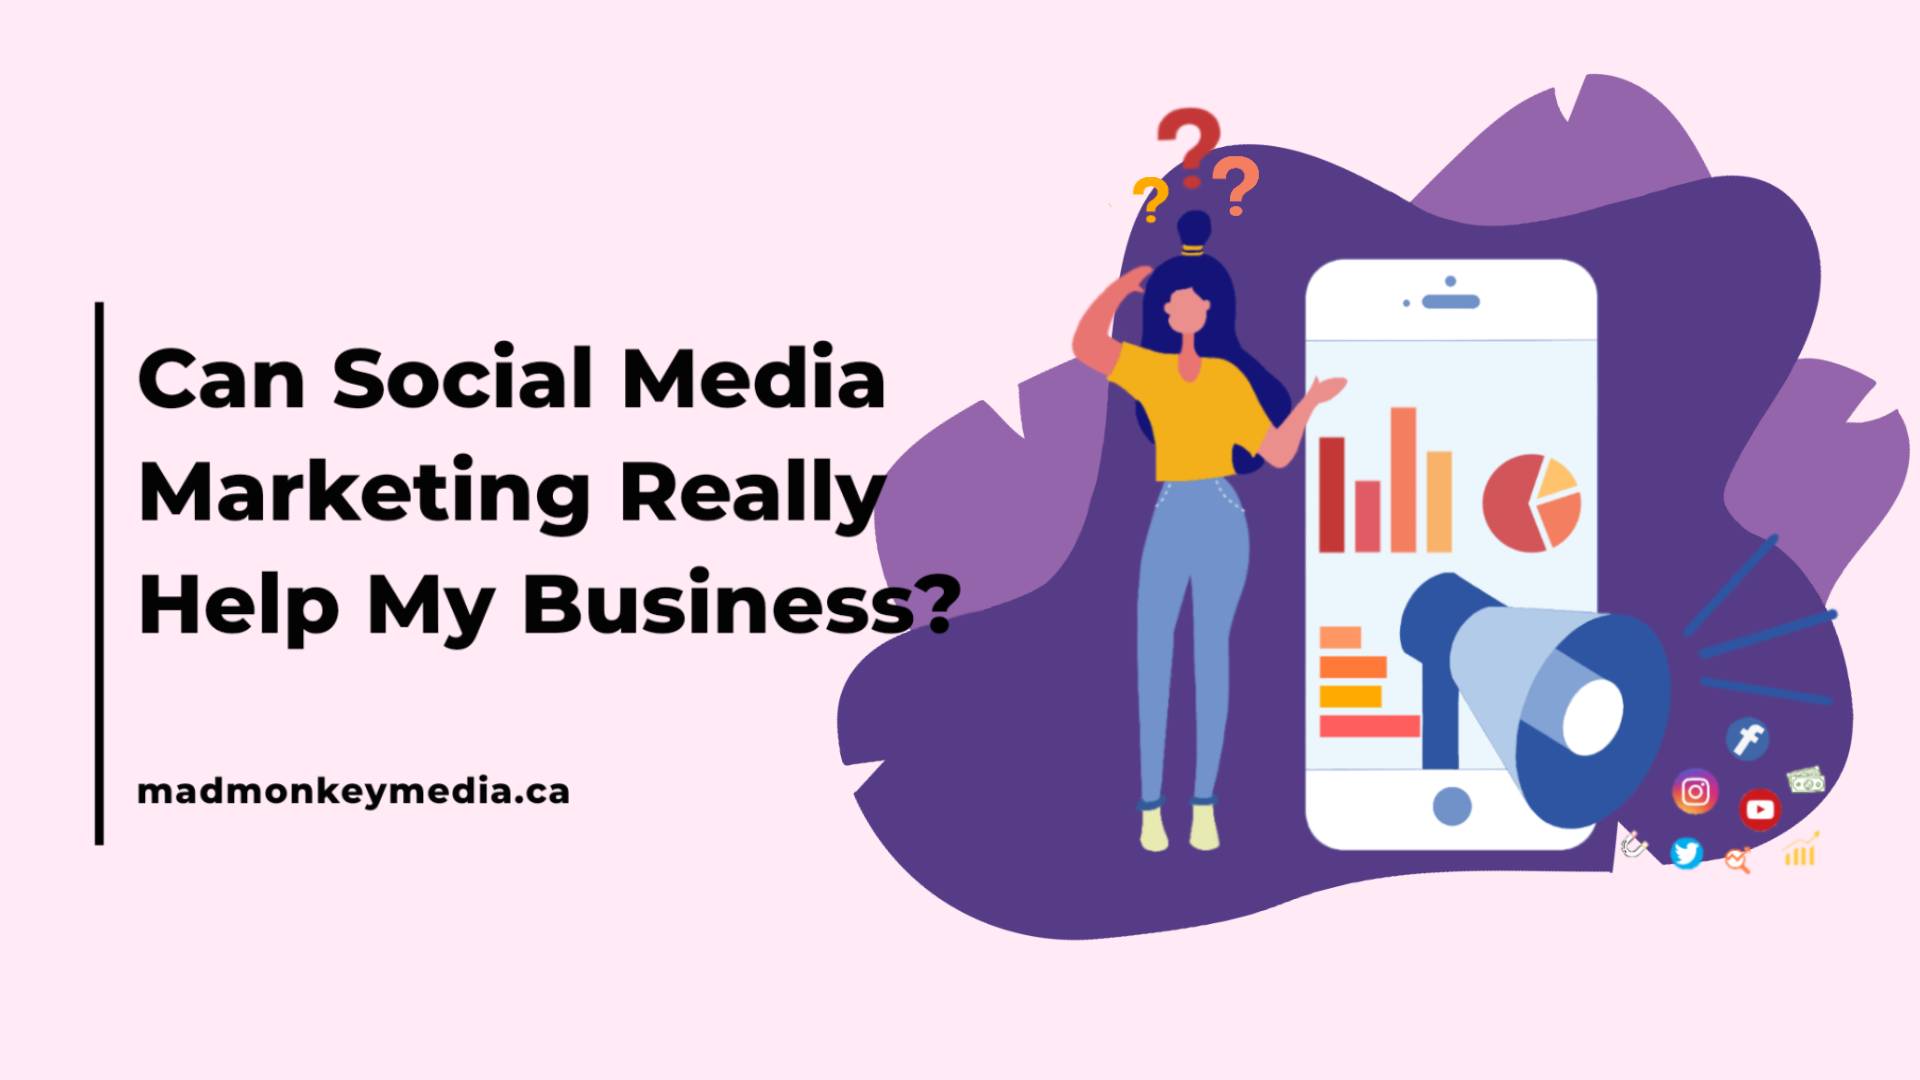 can social media marketing really help my bussiness?